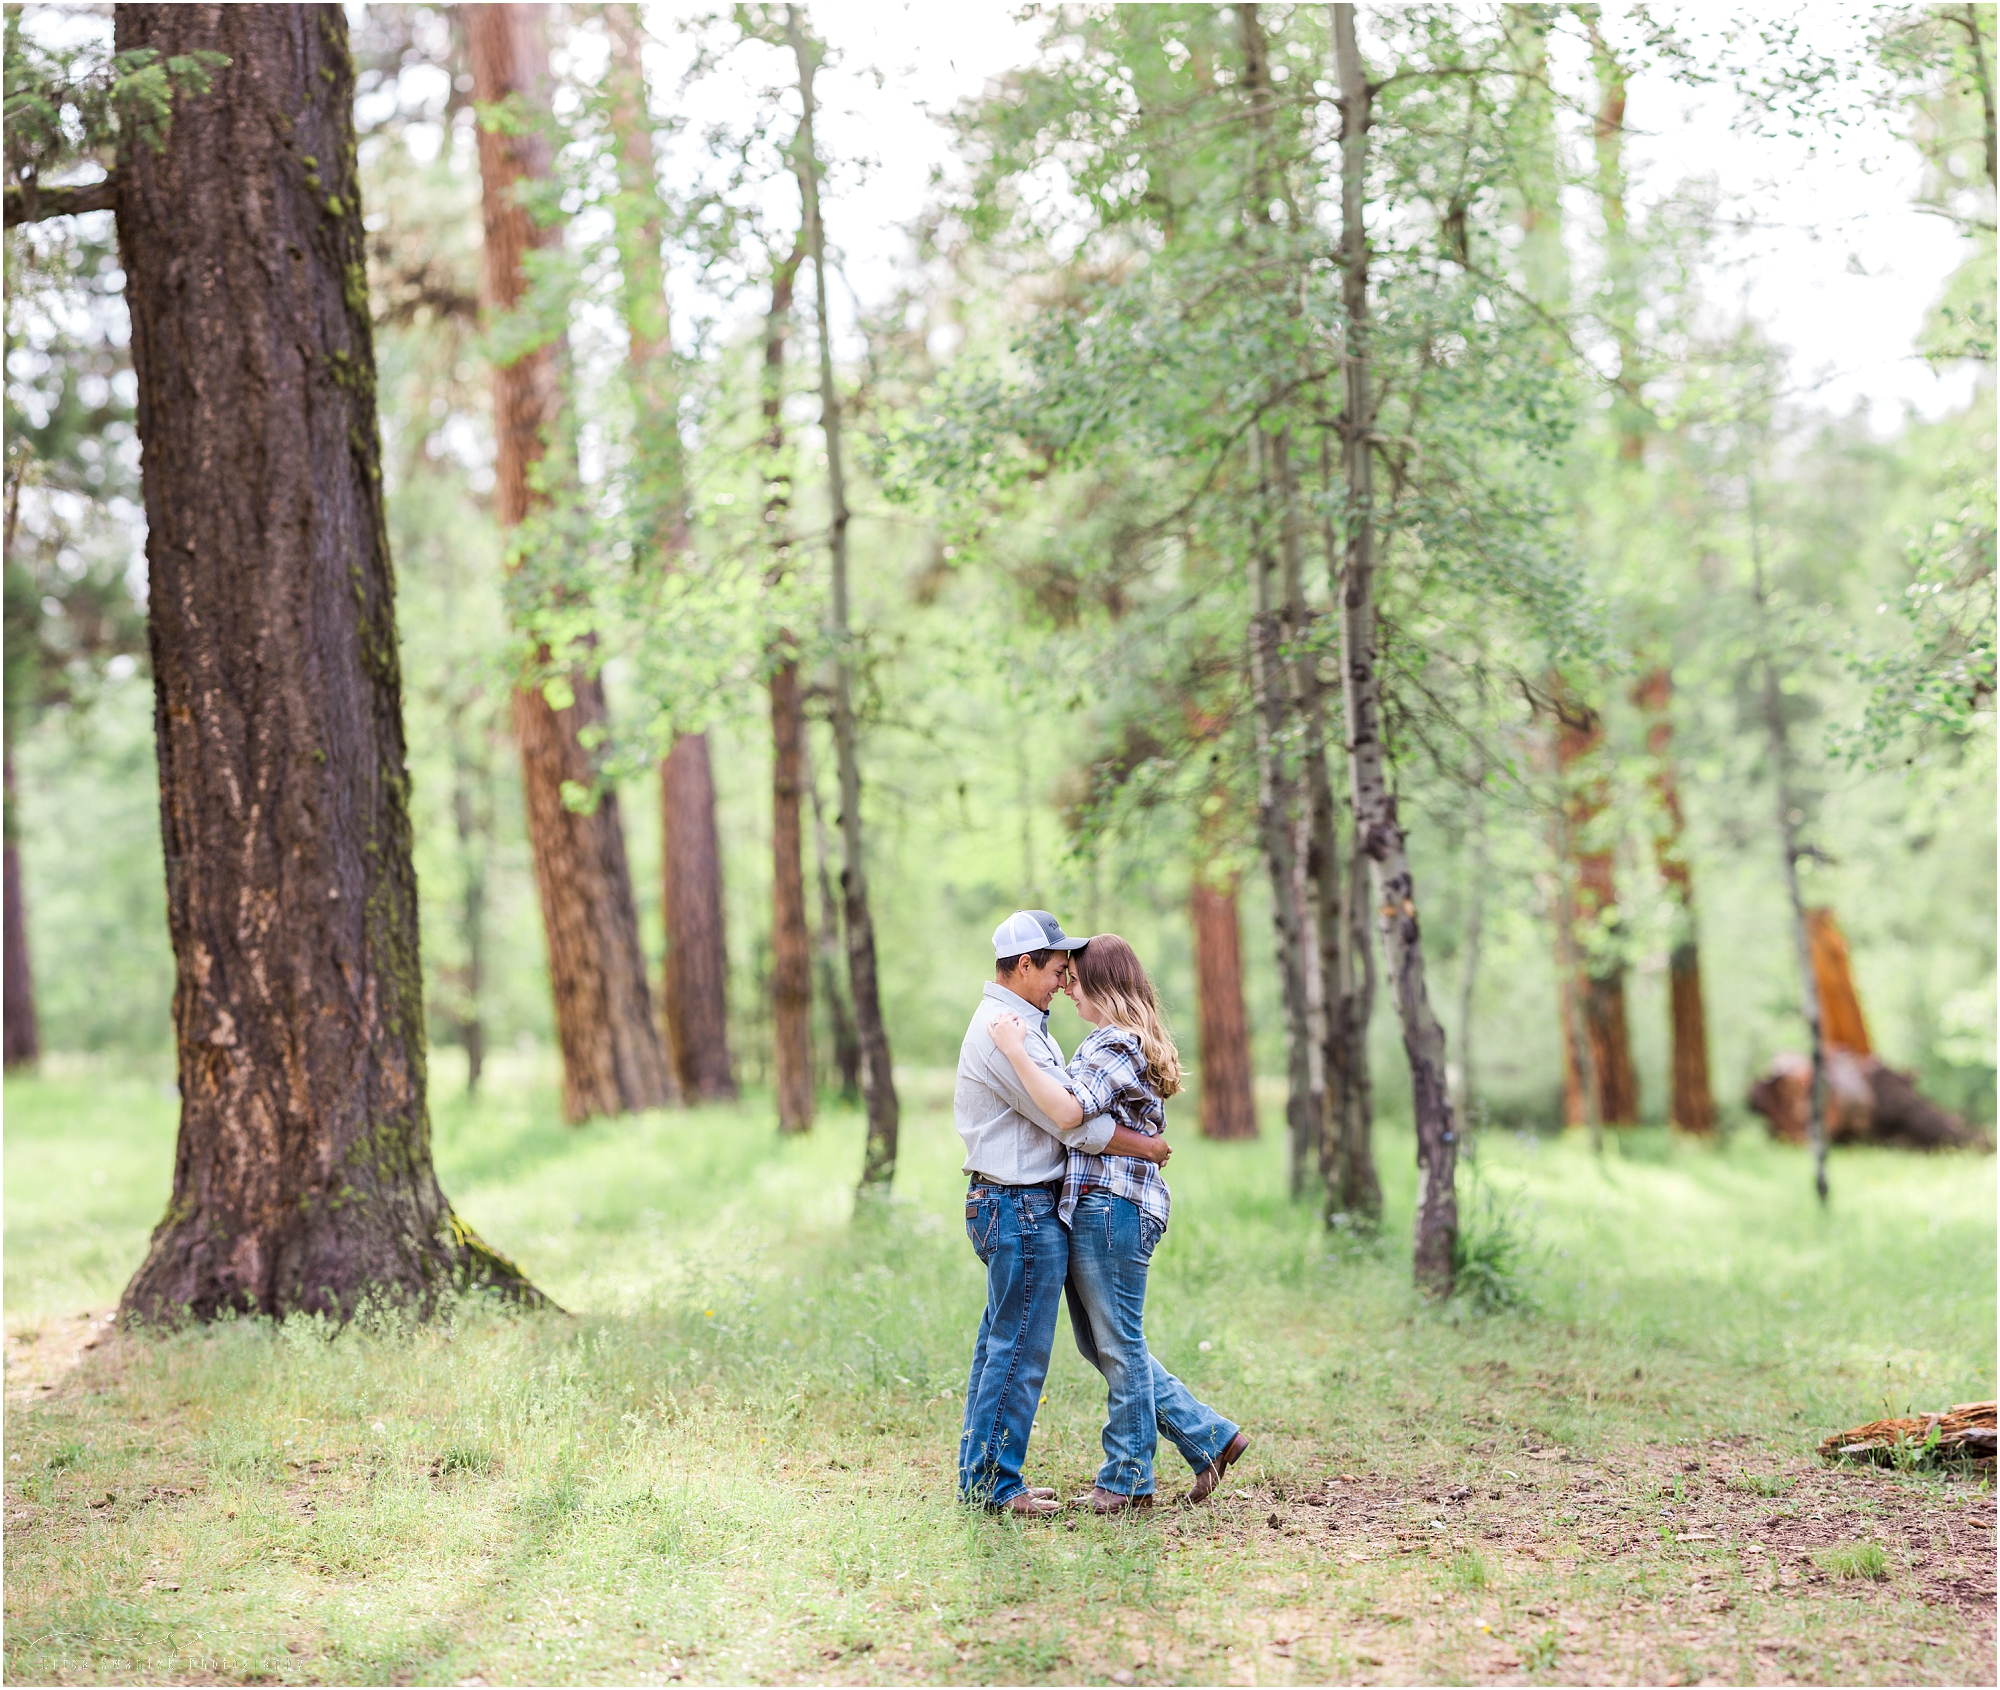 The cutest outdoorsy couple at their Oregon outdoor adventure engagement session by Bend OR wedding photographer Erica Swantek Photography. 